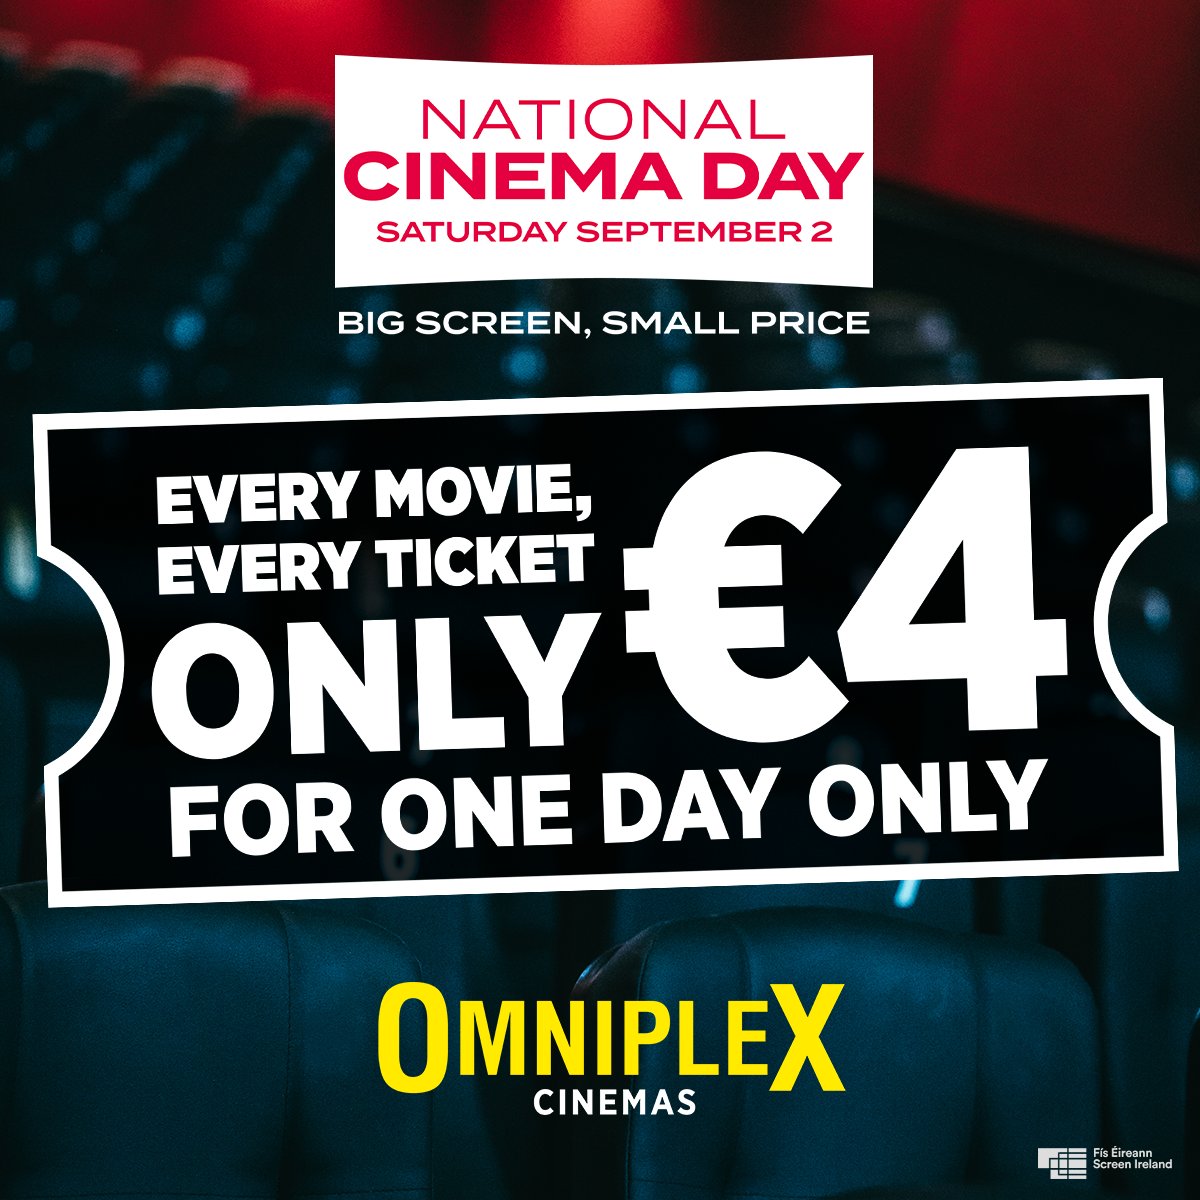 This Saturday Sept 2nd see ANY movie, ANY time for just €4🍿Celebrate #NationalCinemaDay at Omniplex Cinemas and catch some of the year's biggest blockbuster movies across Ireland - for one day only! Avoid disappointment! Pre-book your tickets now at omniplex.ie